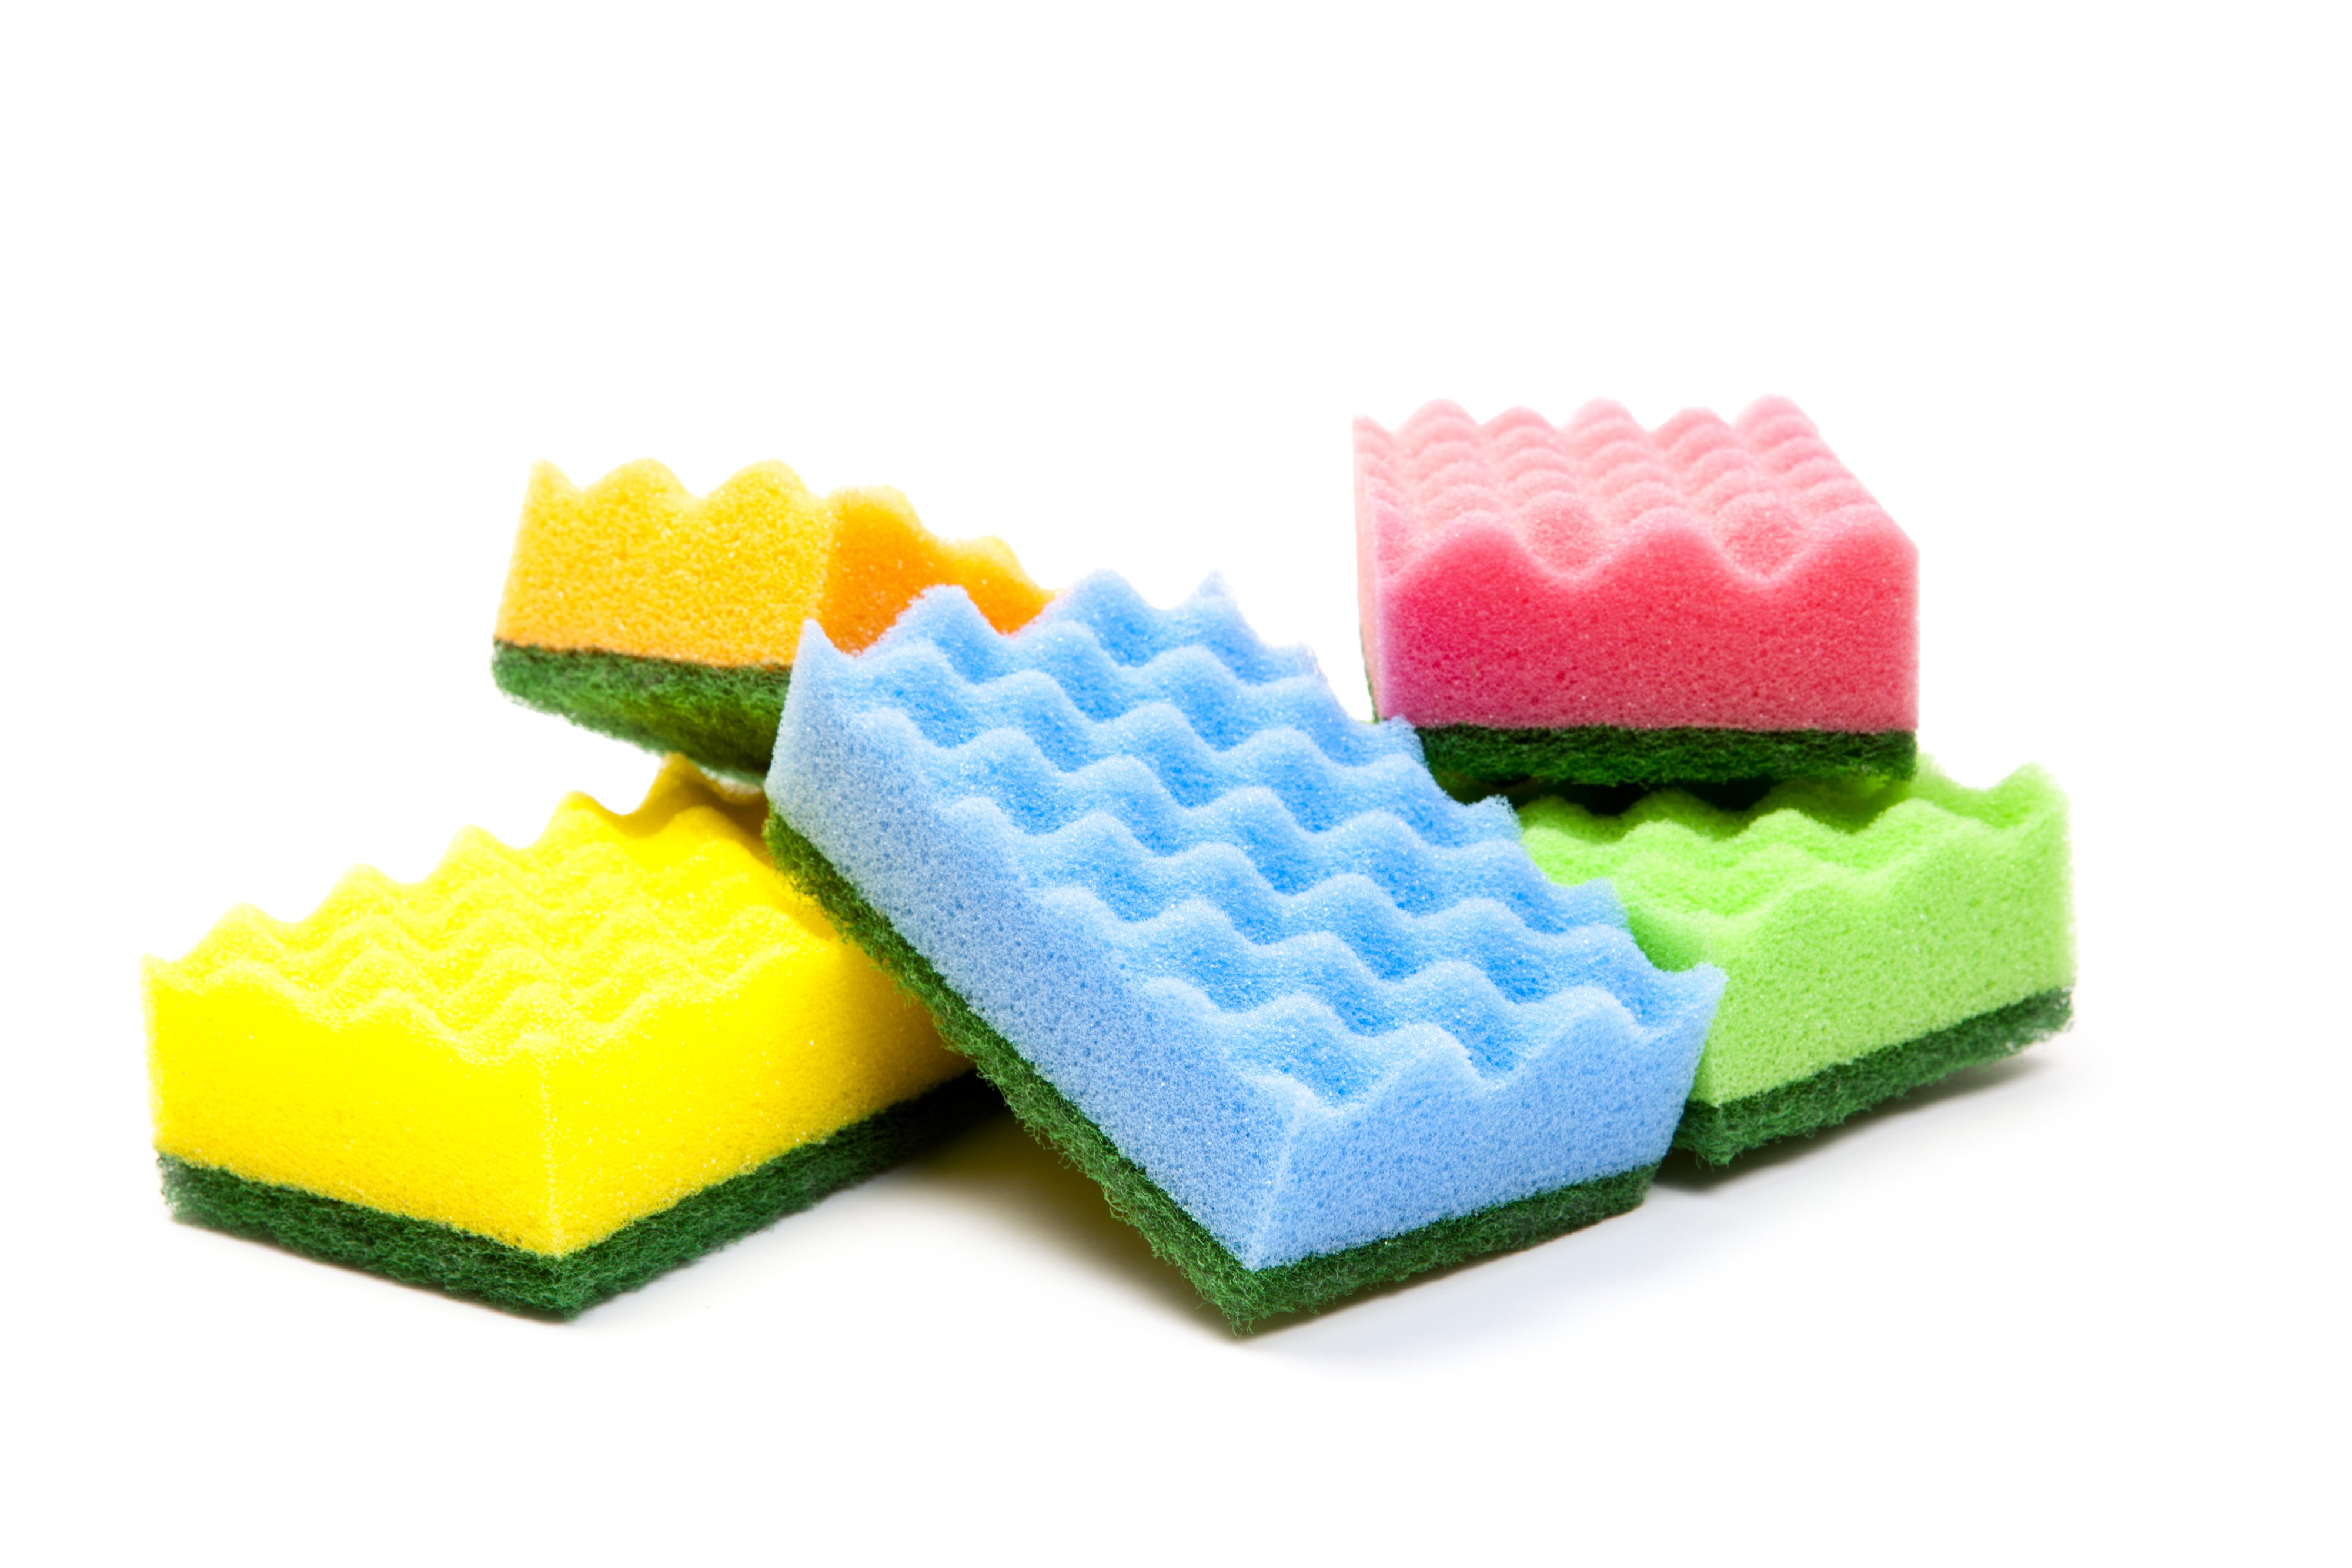 Colorful sponges stacked together | Photo: Shutterstock